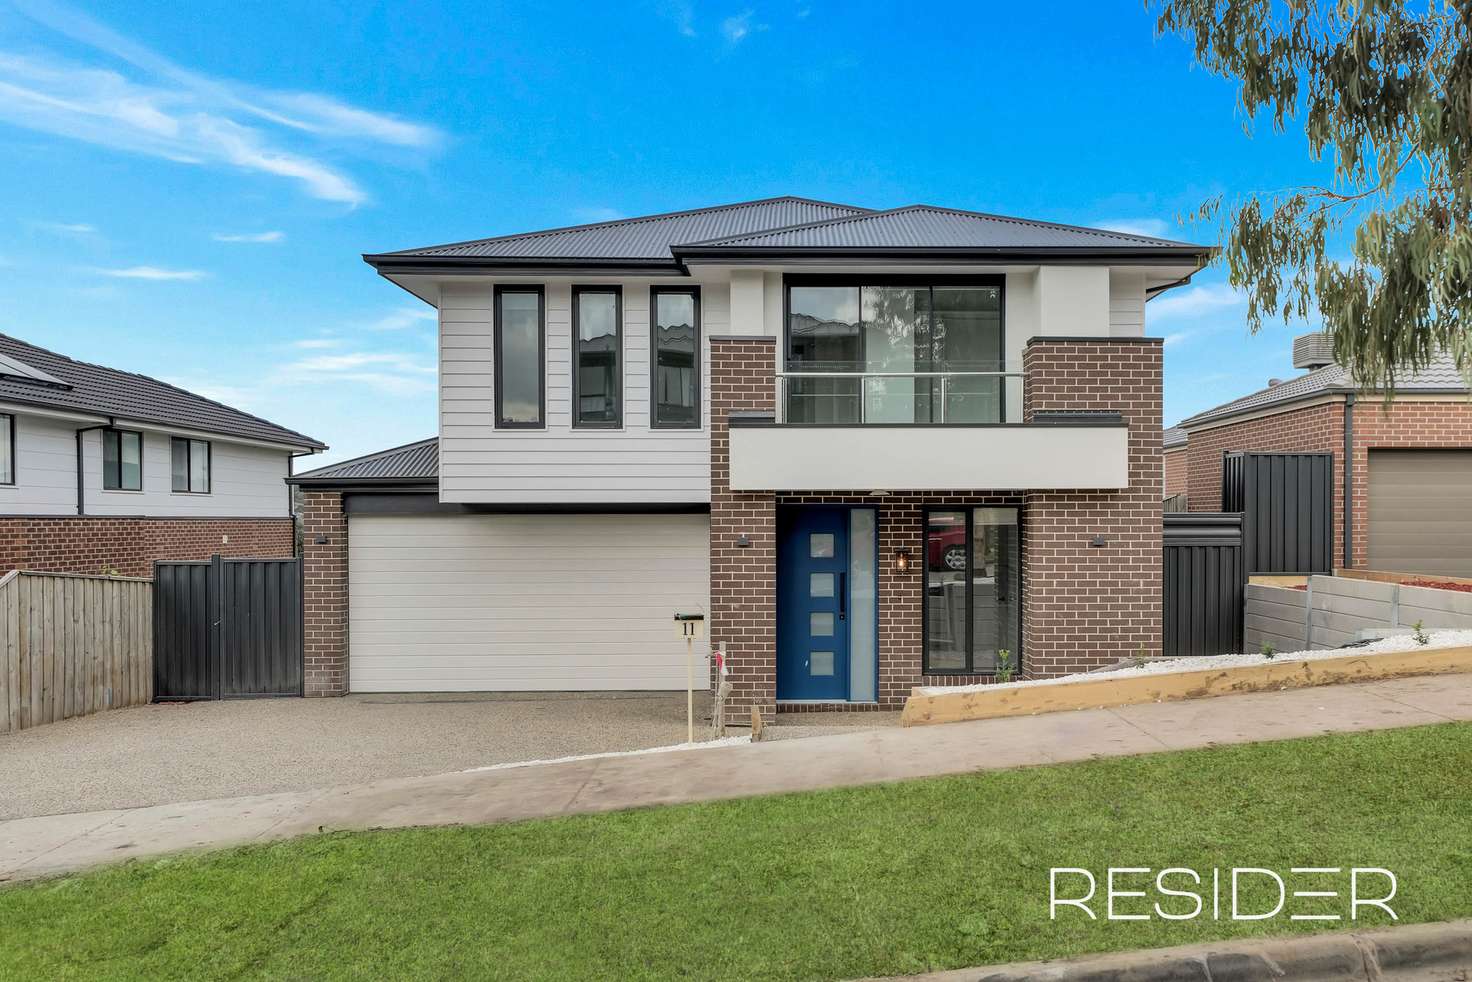 Main view of Homely house listing, 11 Onslow Way, Mernda VIC 3754